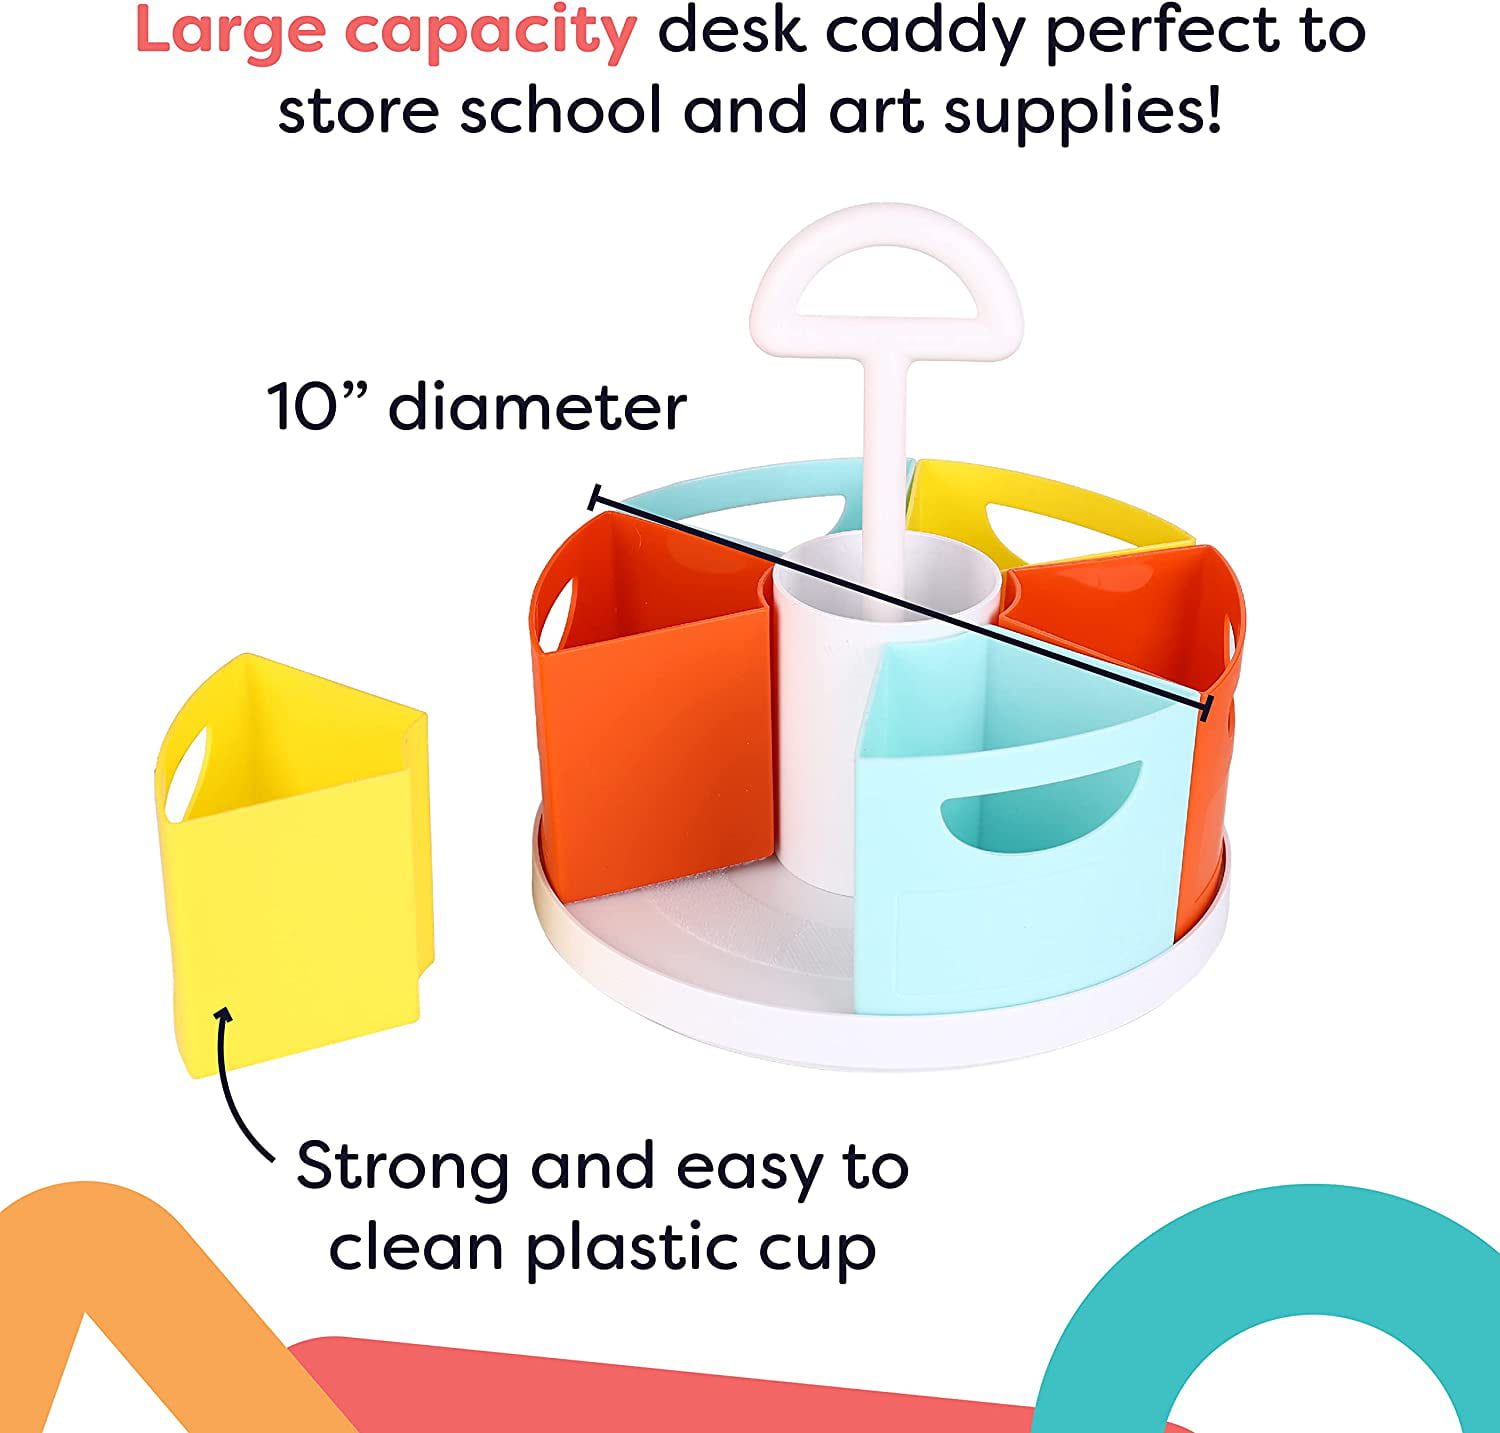 ALBEN Lazy Susan Kids Desk Organizer - Rotates 360 Degrees for Easy Access  to all Art and School Supplies Storage, Perfect Arts and Crafts Organizer